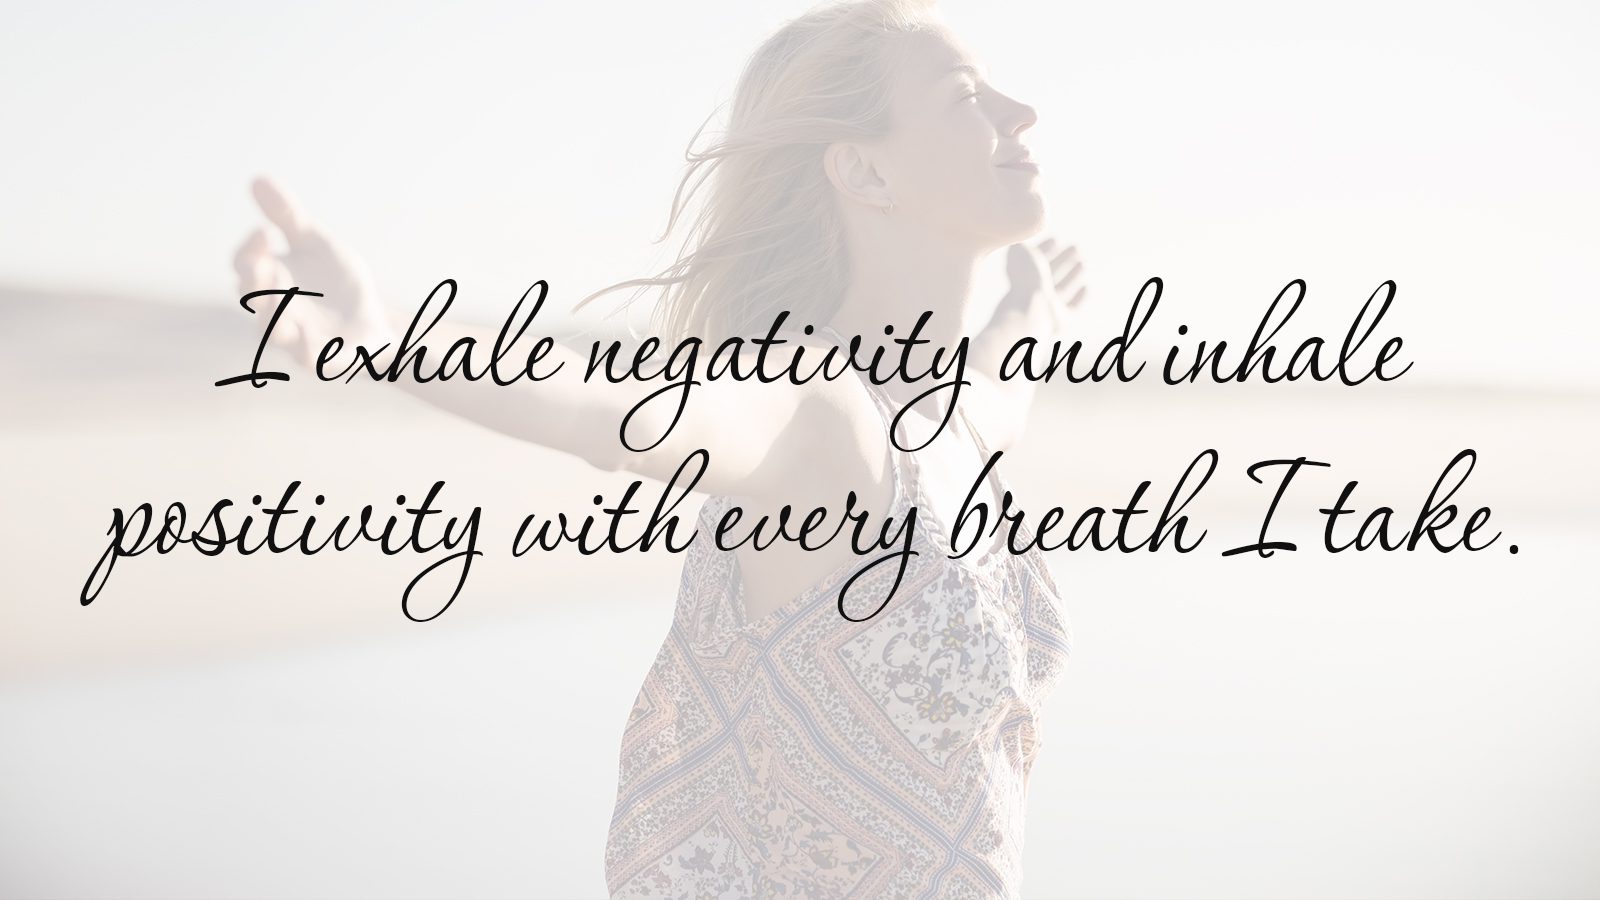 20 Self-Care Mantras to Brighten Your Outlook on Life